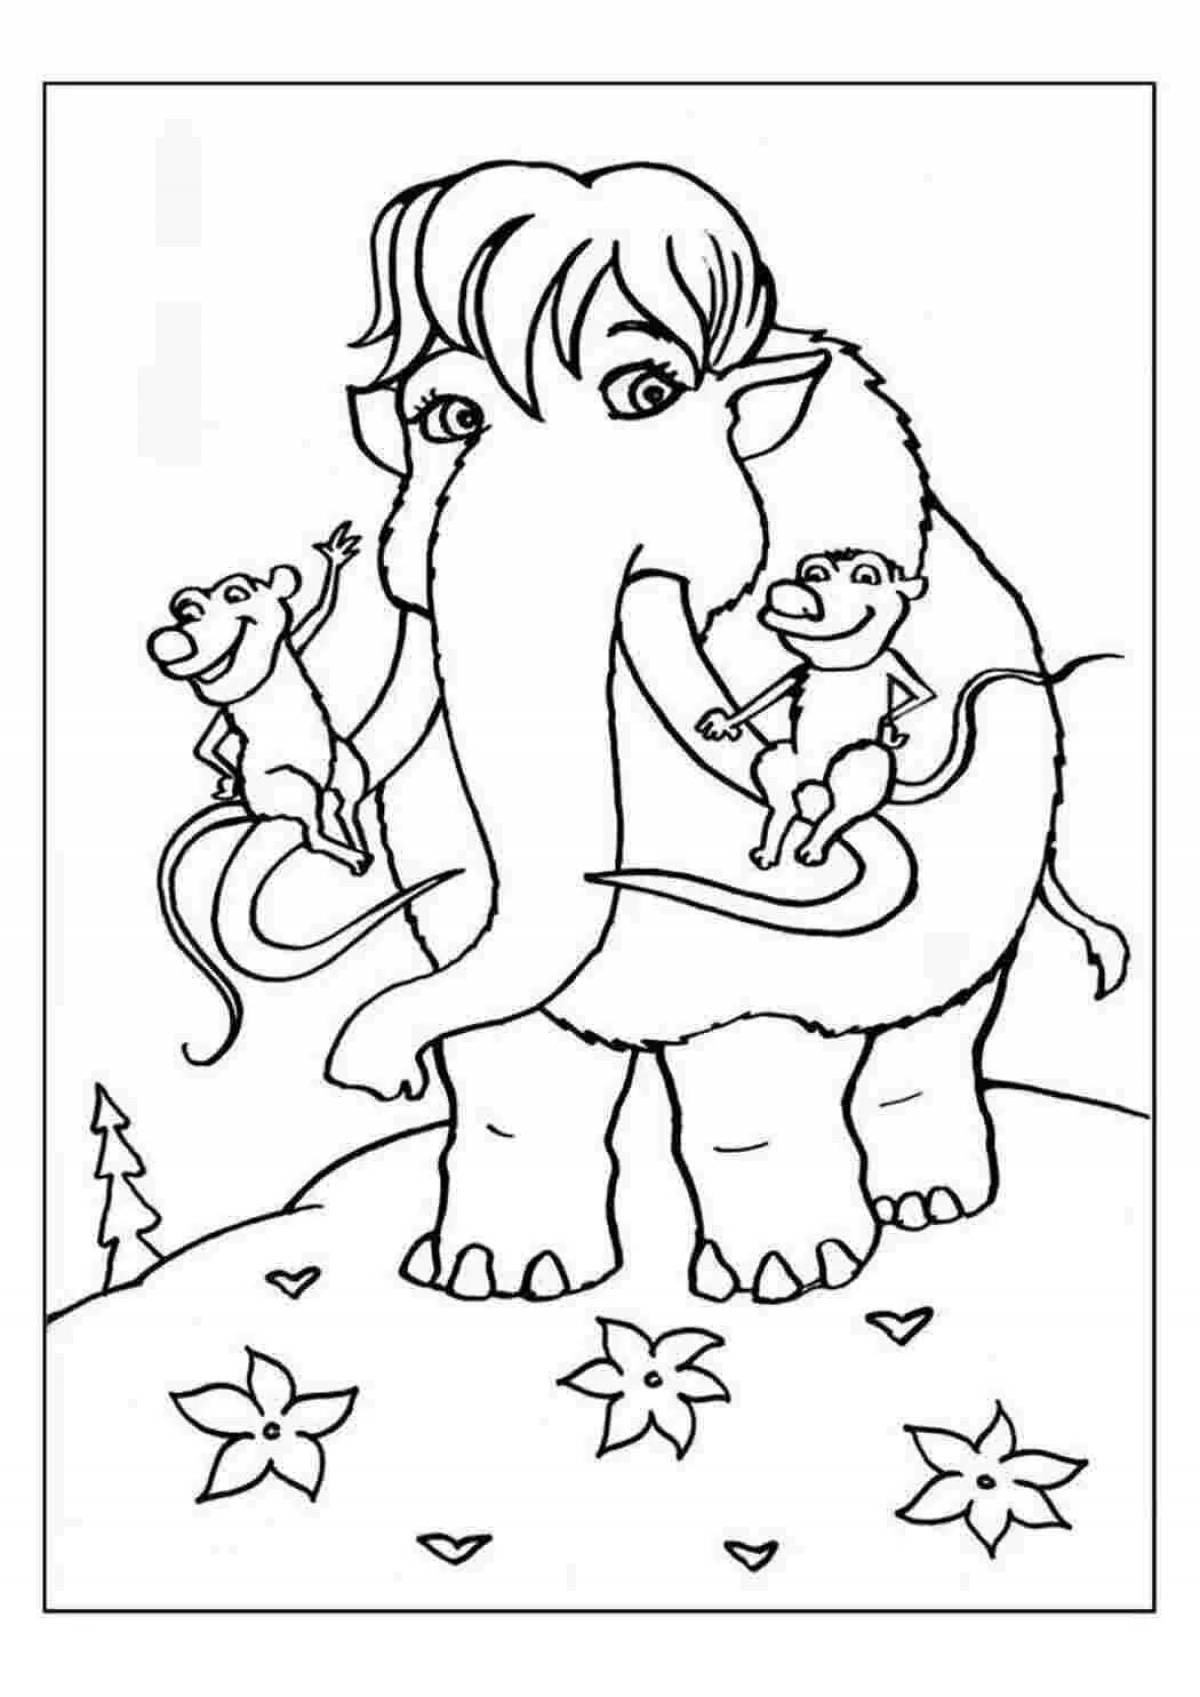 Vivacious ice age 4 coloring page